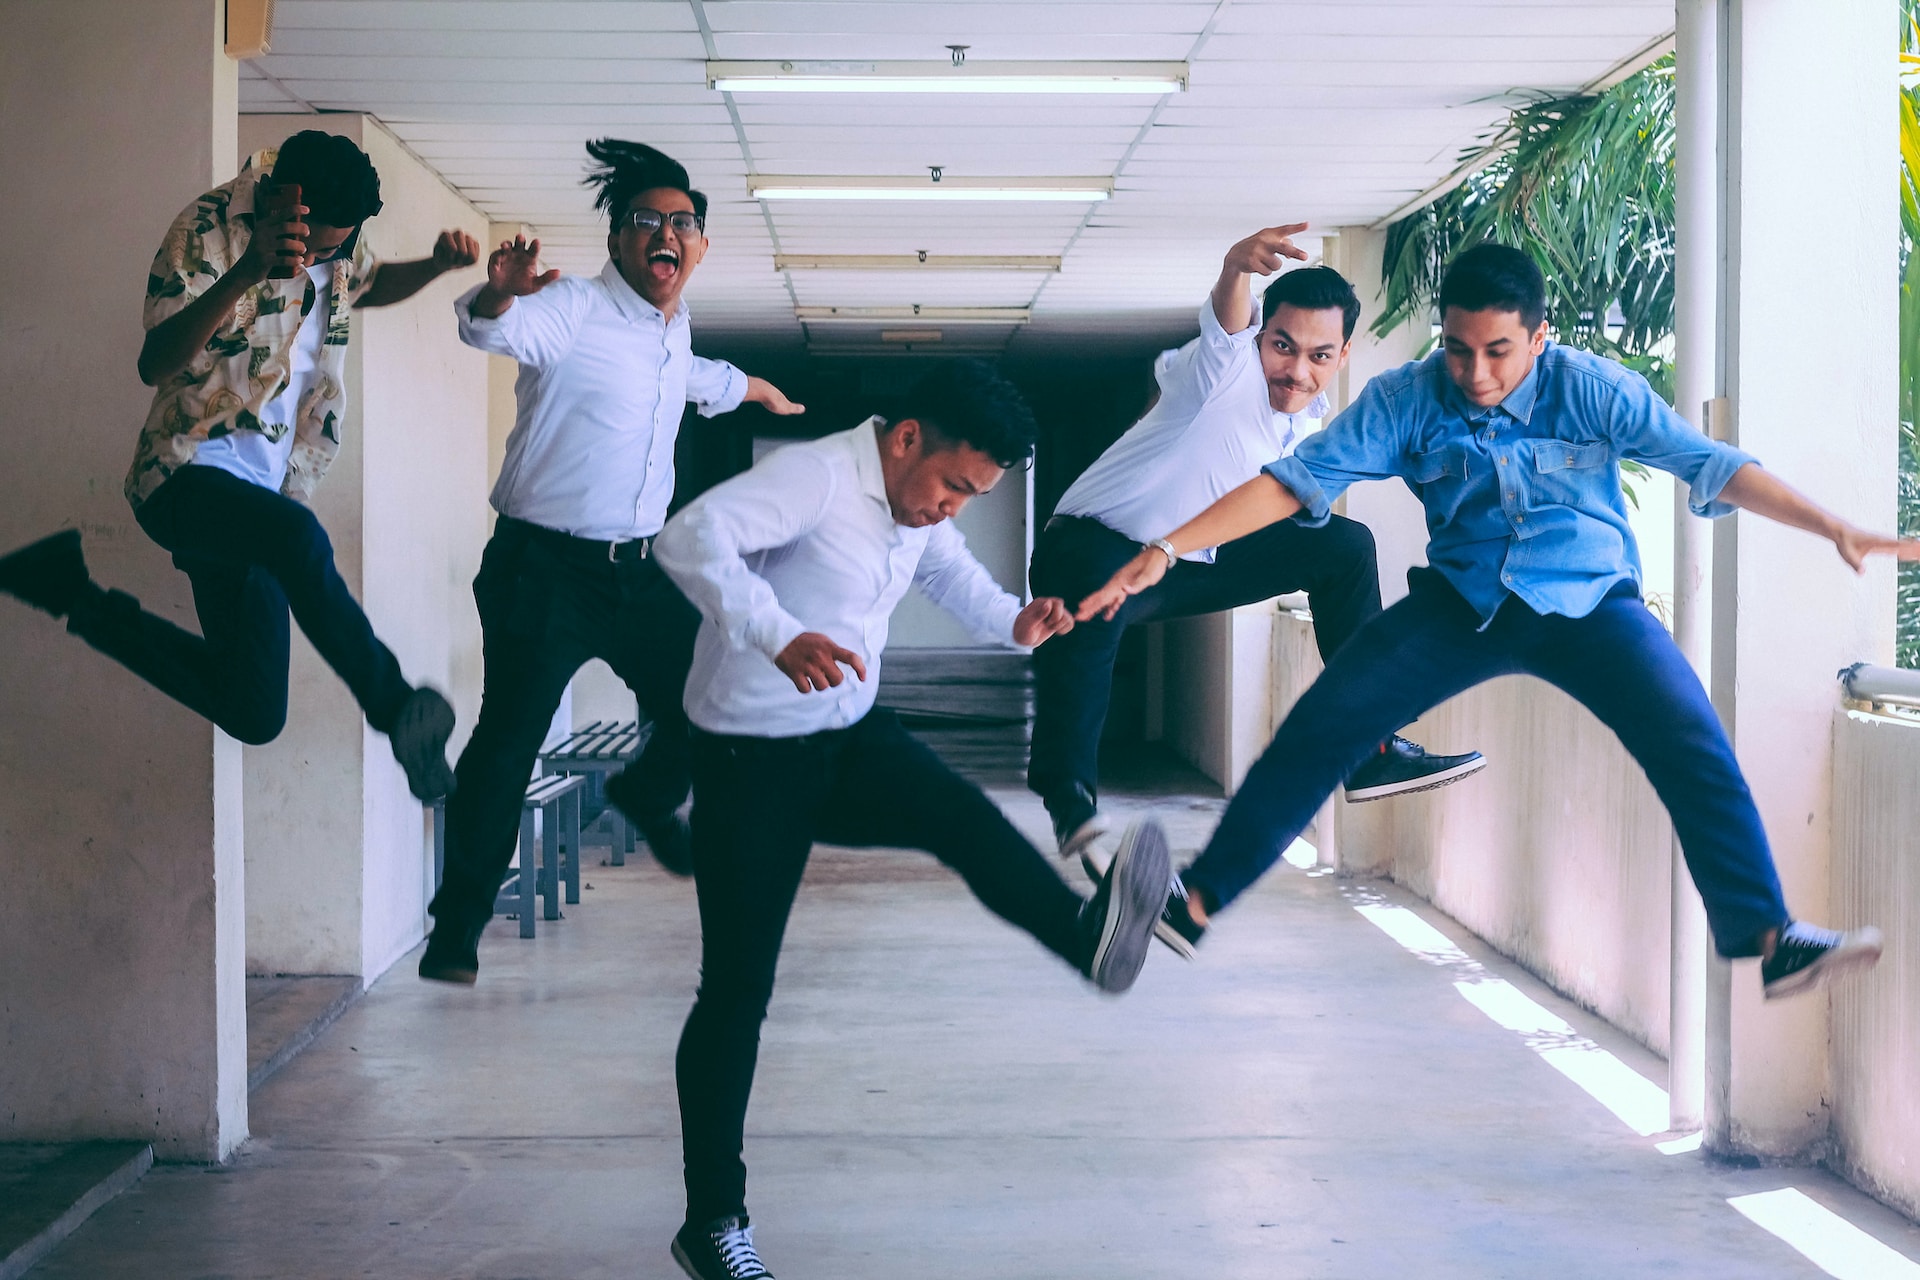 Employees jumping in the air